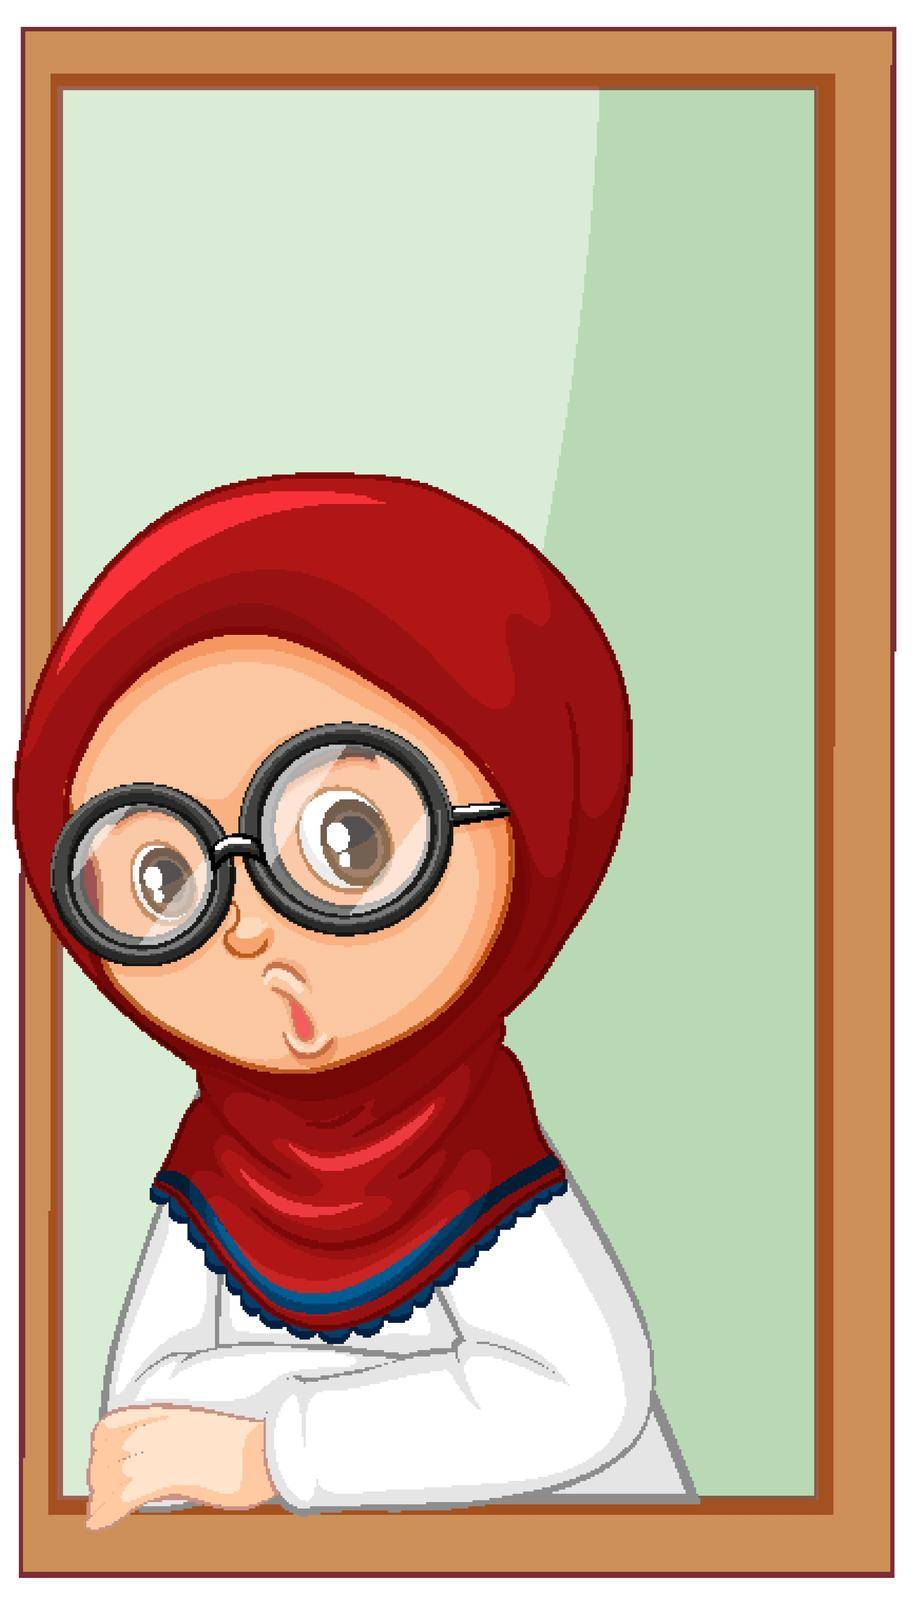 Muslim girl by the window on white background illustration